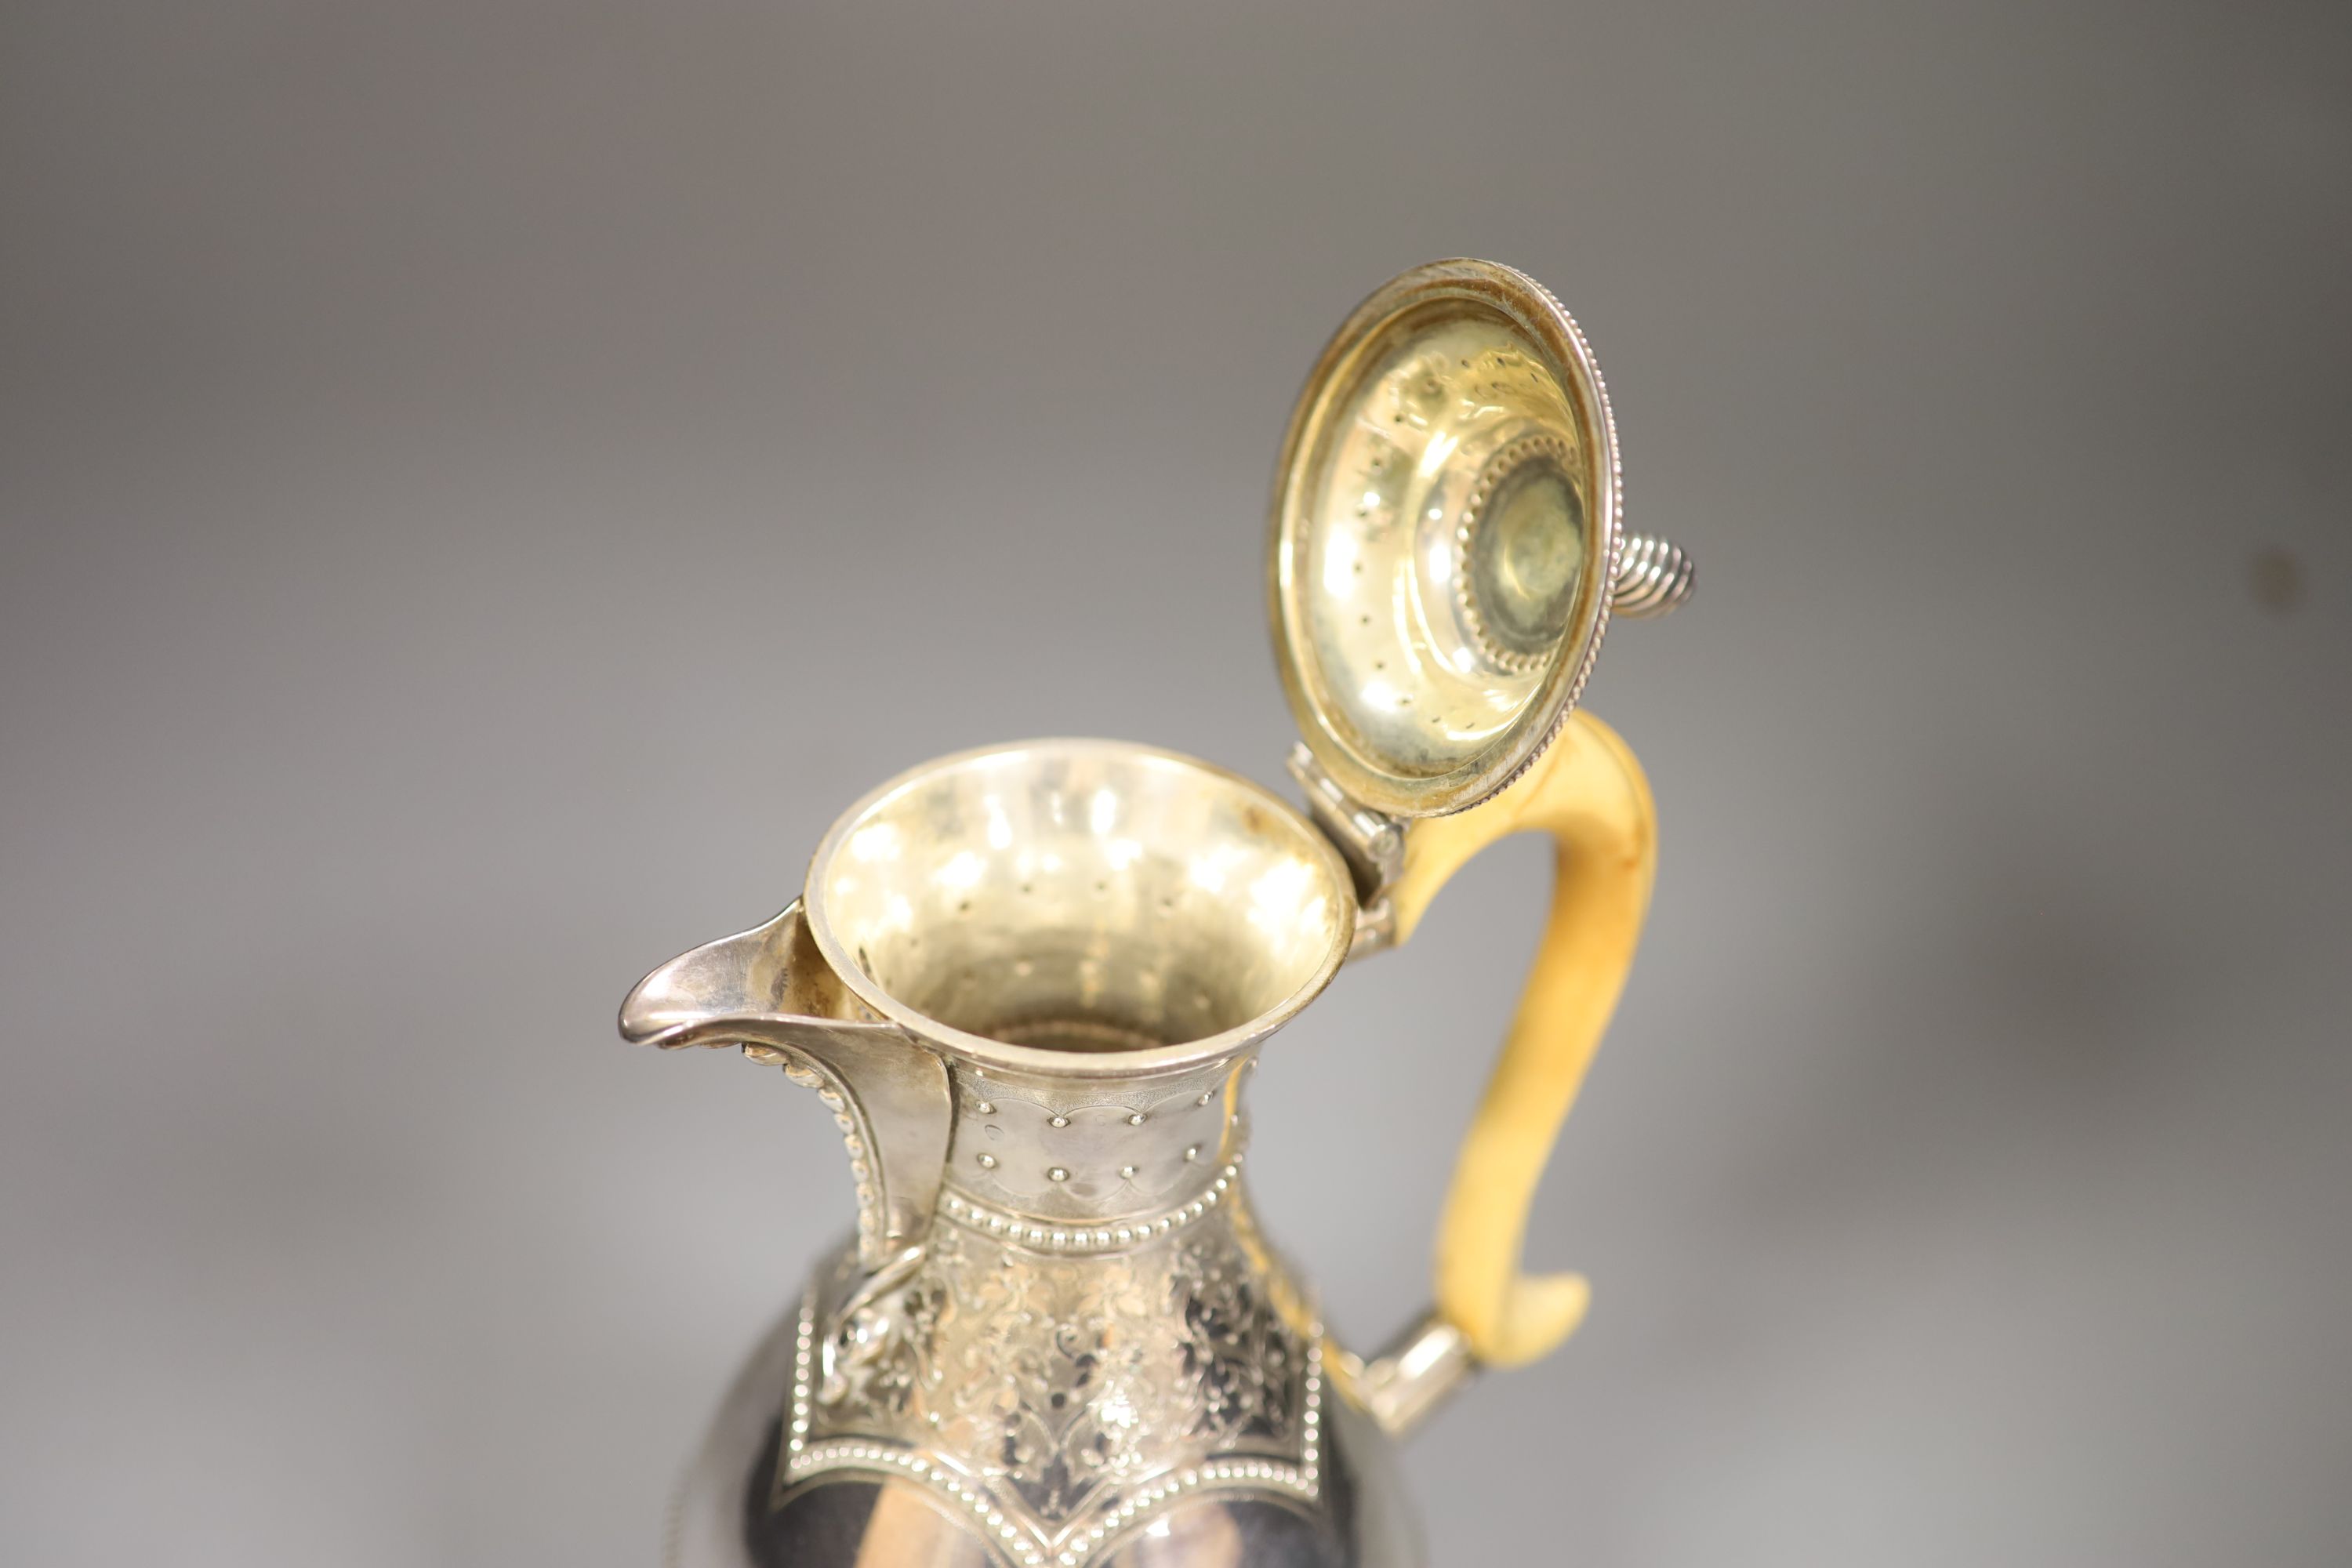 A Victorian silver baluster hot water pot, Henry Holland, London, 1878, with ivory handle, height 23.8cm, gross 15oz.